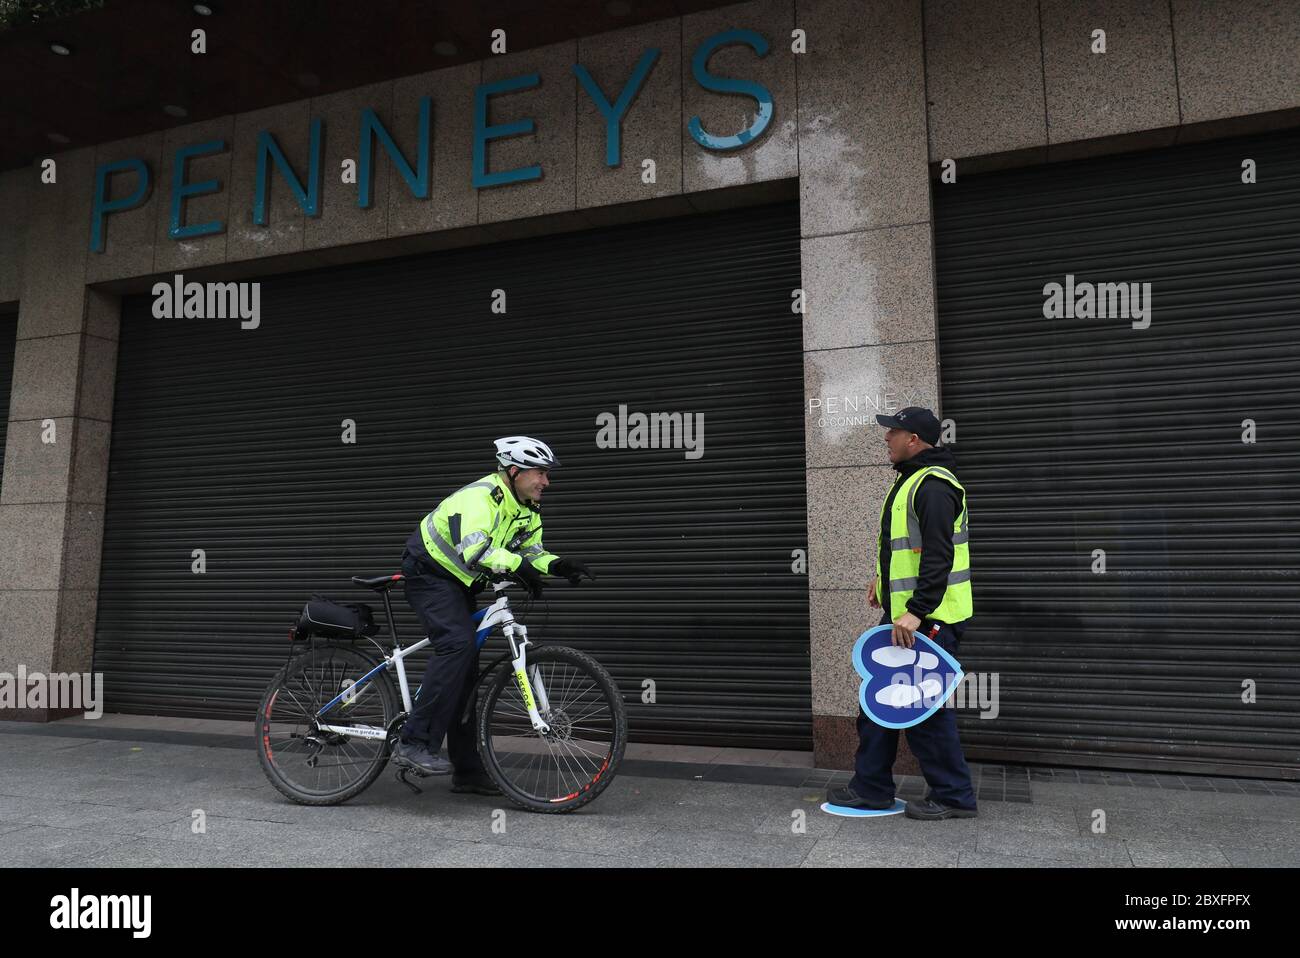 Garda sergeant Rodger Quinn (left) speaks to Dublin city council worker, Joe Carroll, putting down queue stickers on O'Connell Street, outside Penneys in Dublin, ahead of its reopening as phase two of the Ireland's coronavirus recovery road map will begin on Monday as planned, along with other measures originally envisaged for later phases. Stock Photo